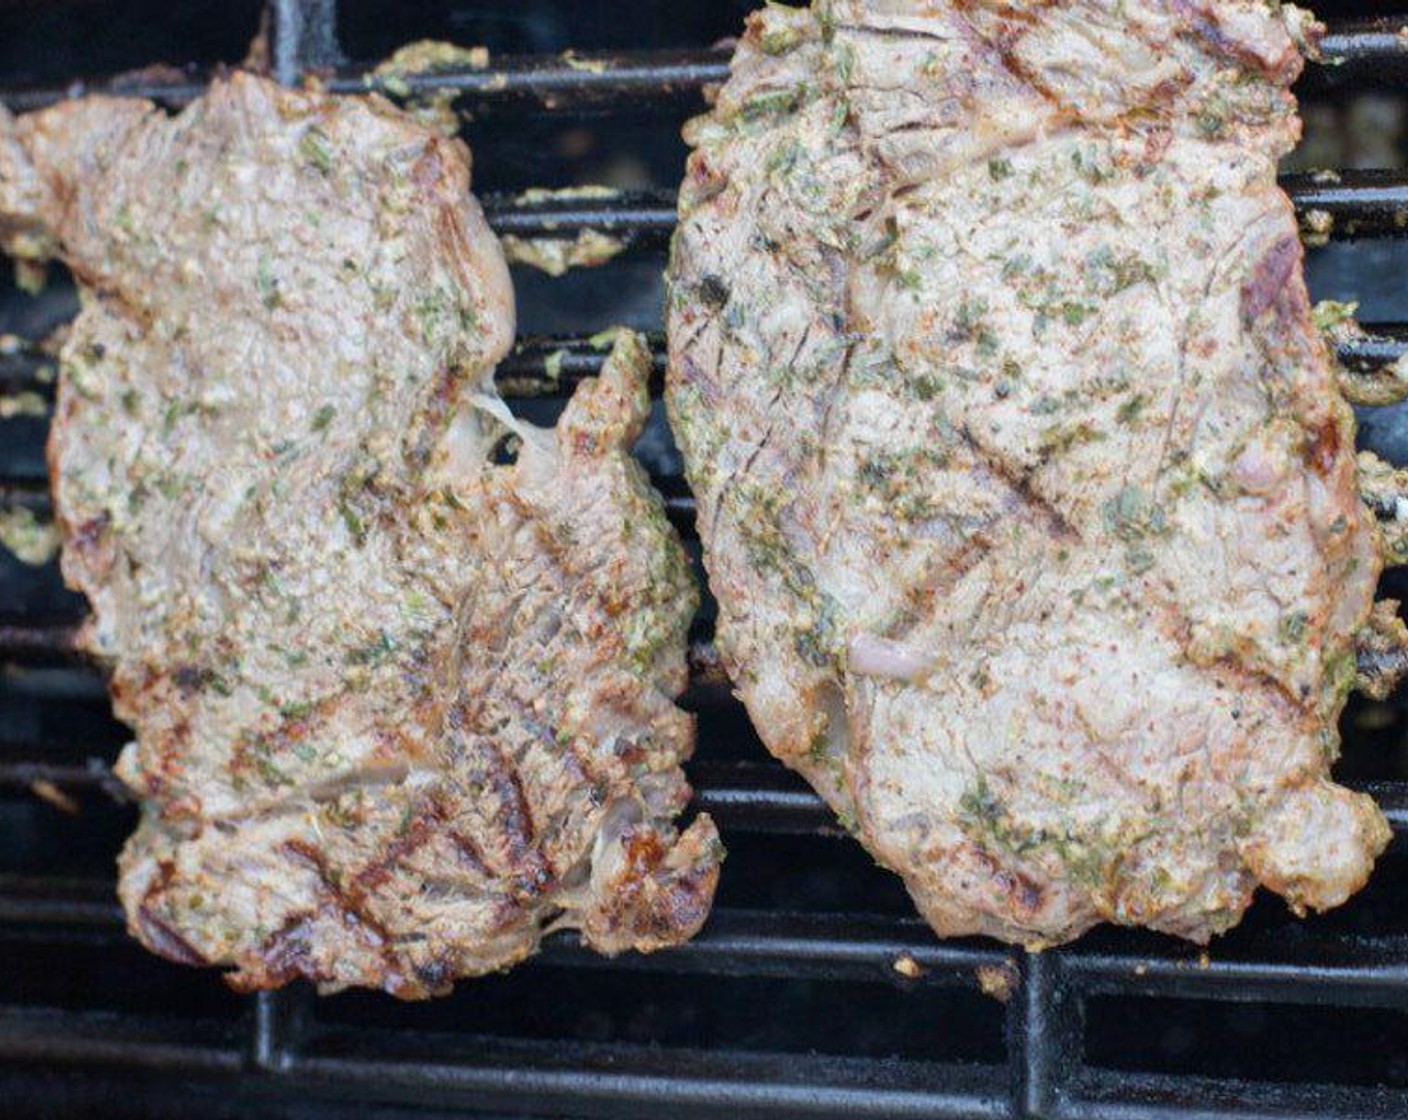 step 4 Grill or pan fry steaks to your perfection, about 5 minutes per side for medium rare.